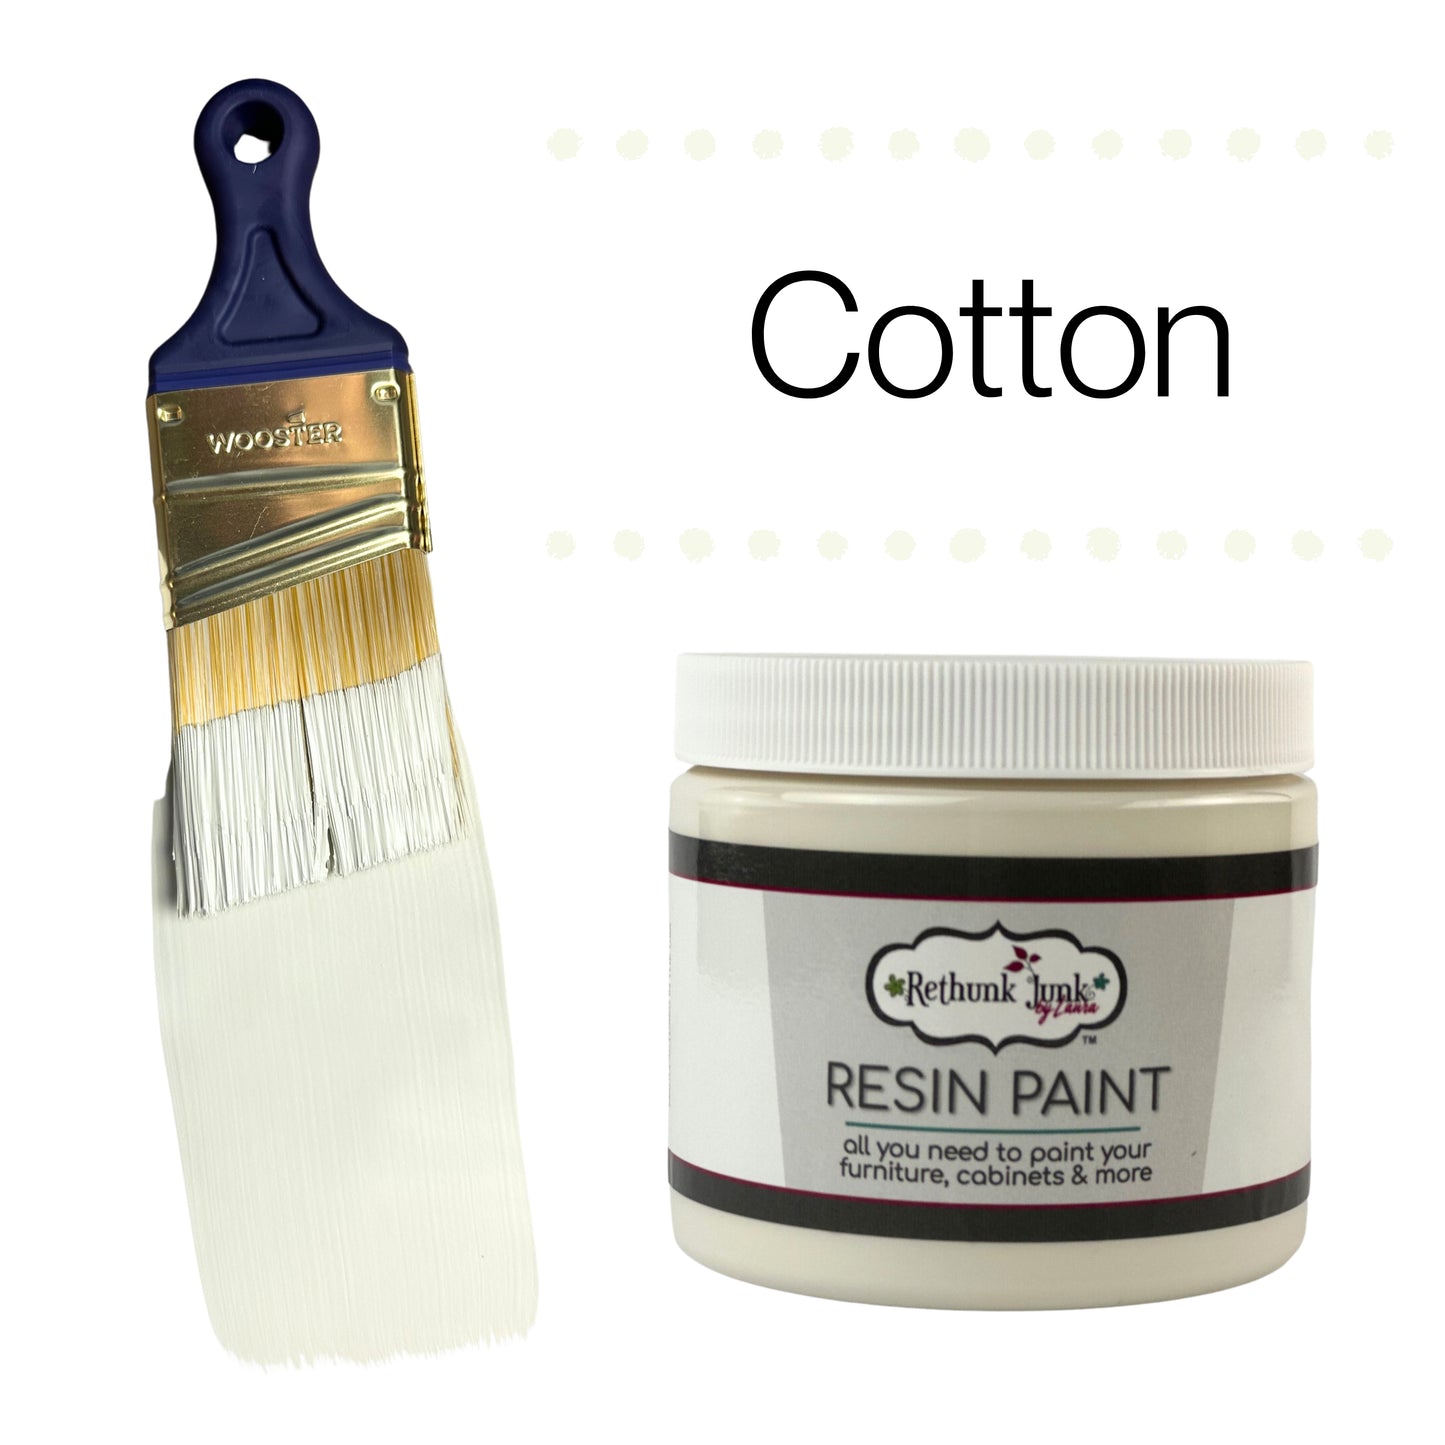 Cotton Furniture and Cabinet Paint